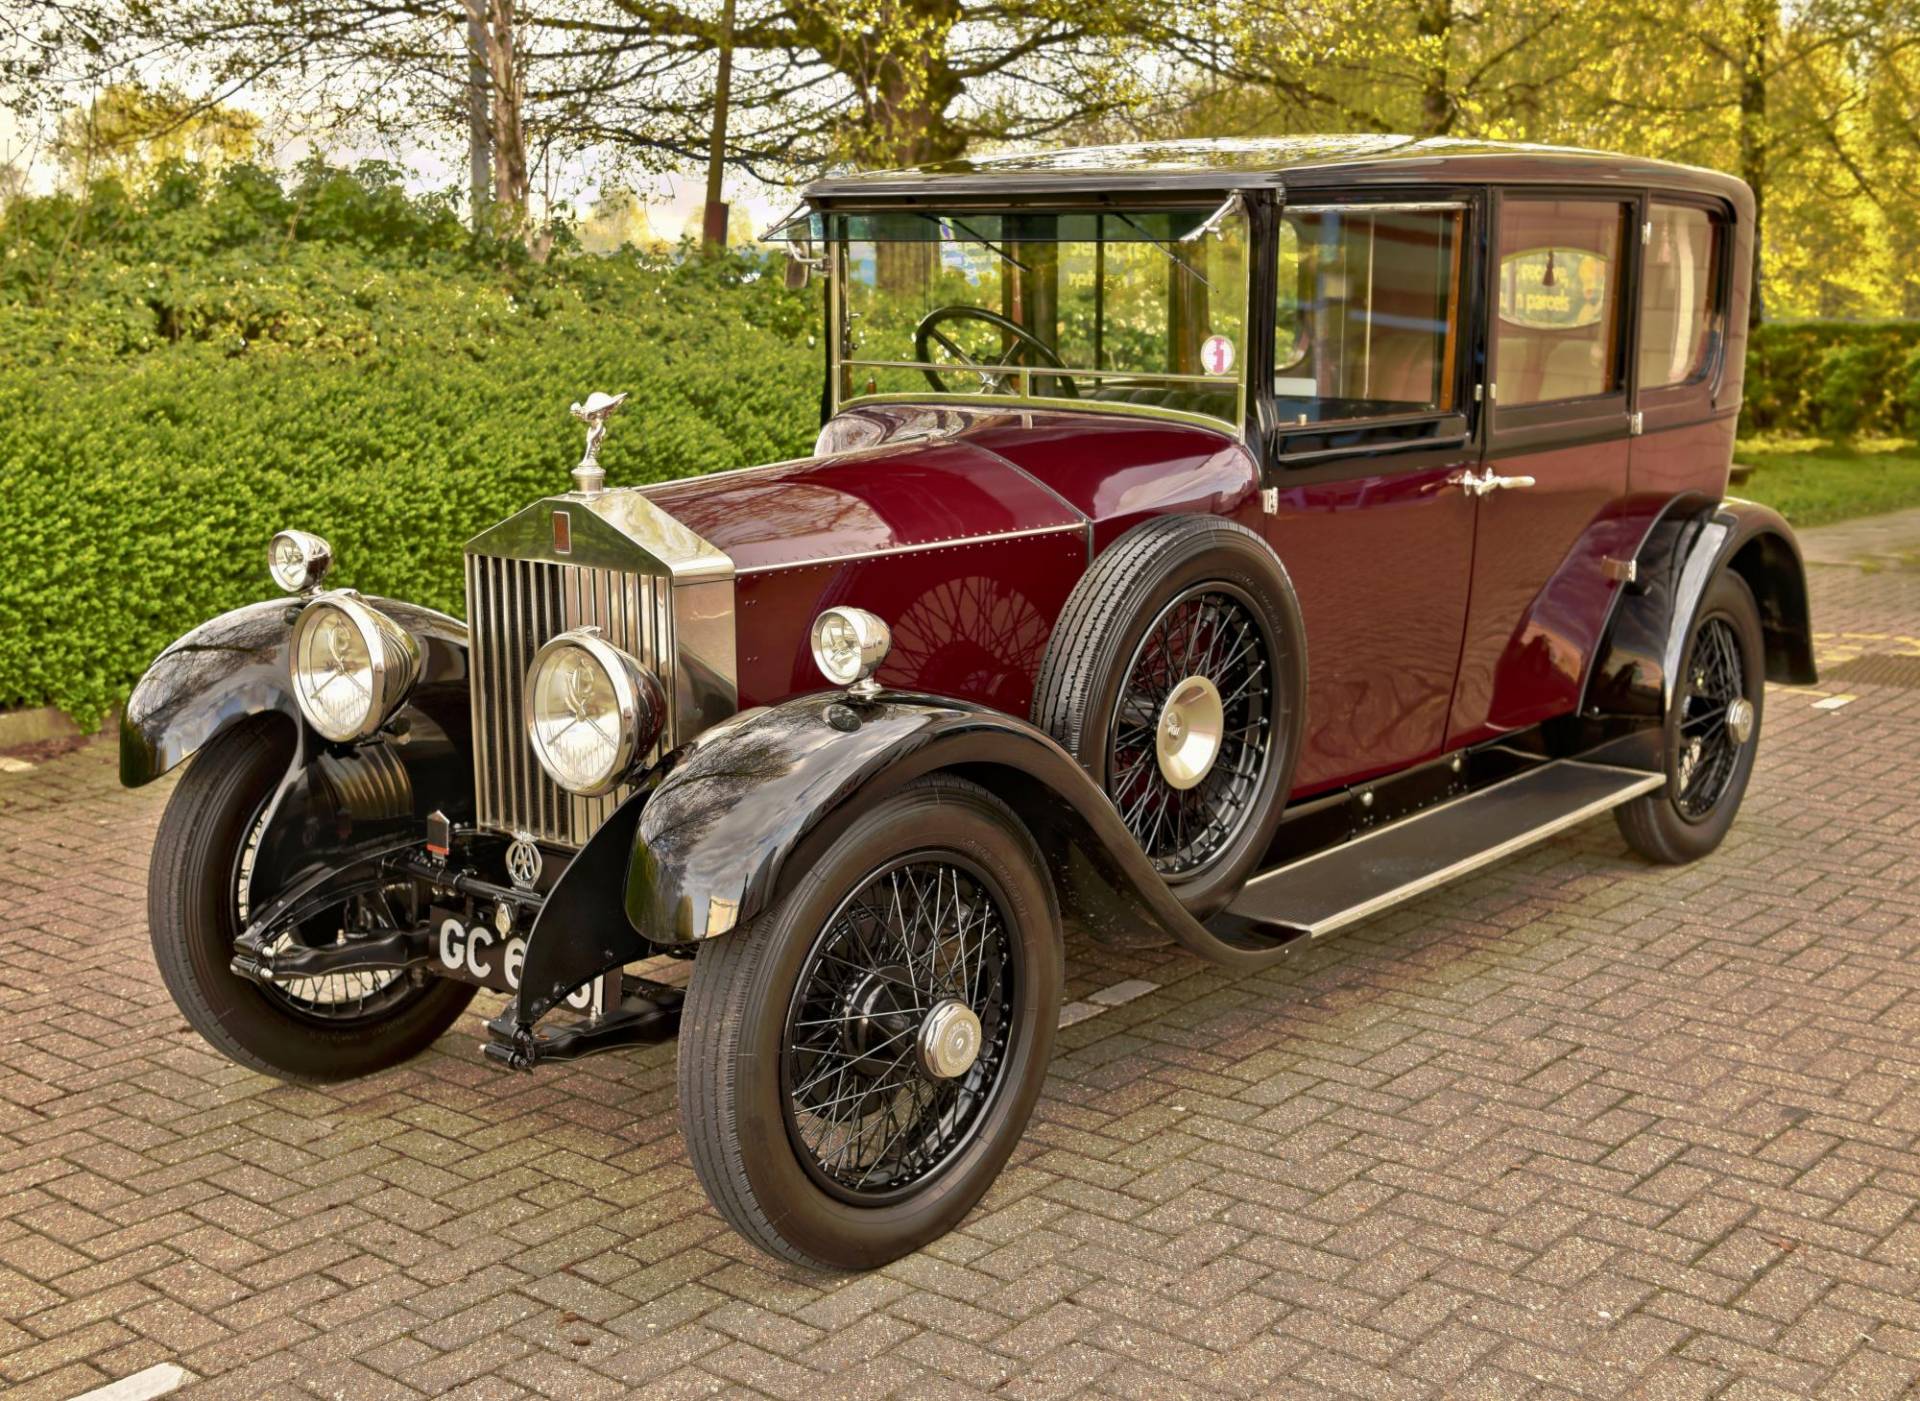 1926 RollsRoyce 20 hp is listed Sold on ClassicDigest in Grays by Vintage  Prestige for 118000  ClassicDigestcom